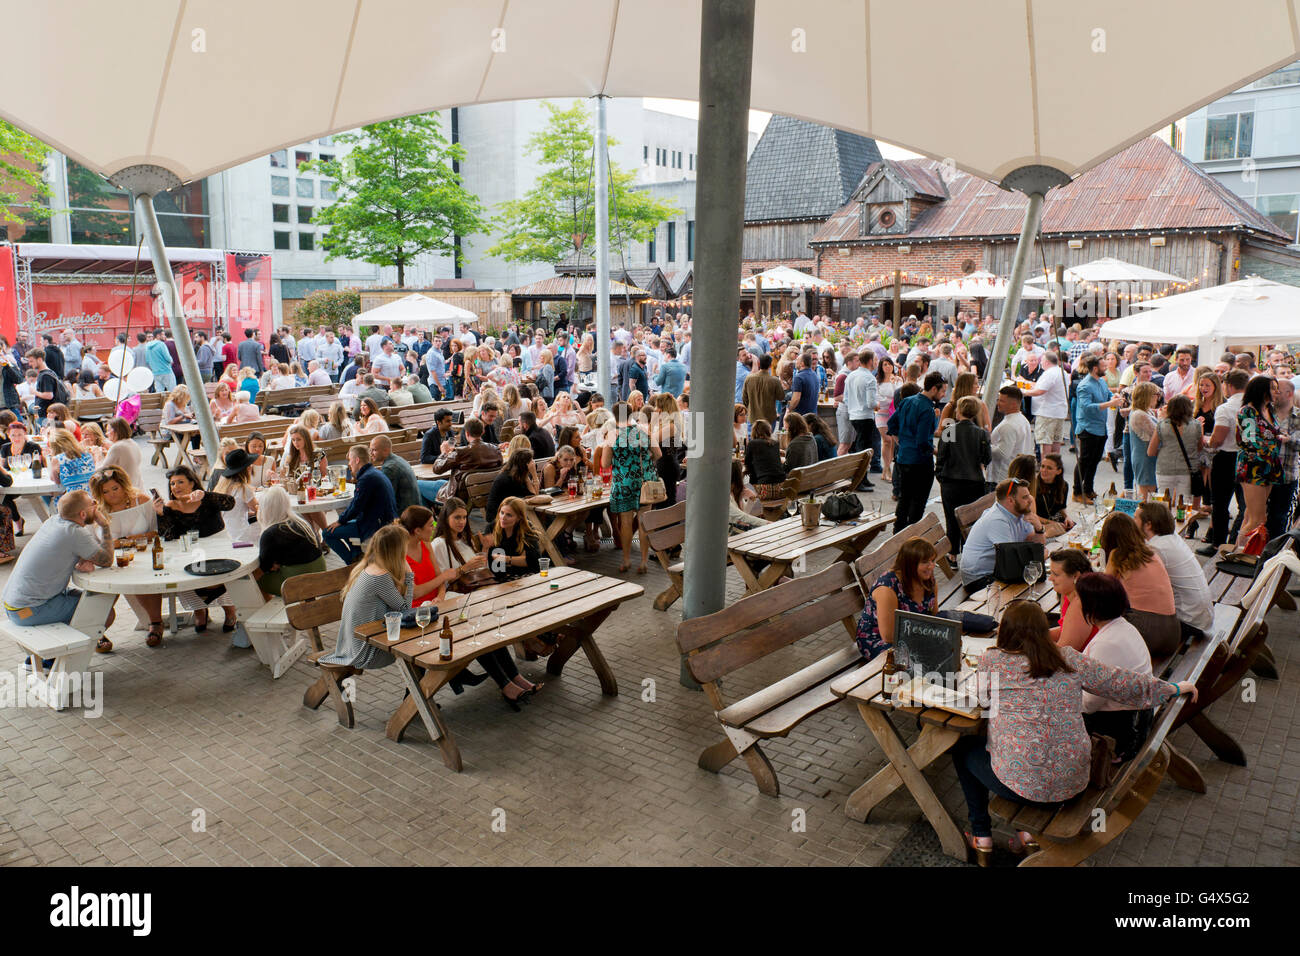 Revellers enjoy the ambiance of the beer garden at the Oast House Restaurant and Bar in the Spinningfields area of Manchester. Stock Photo